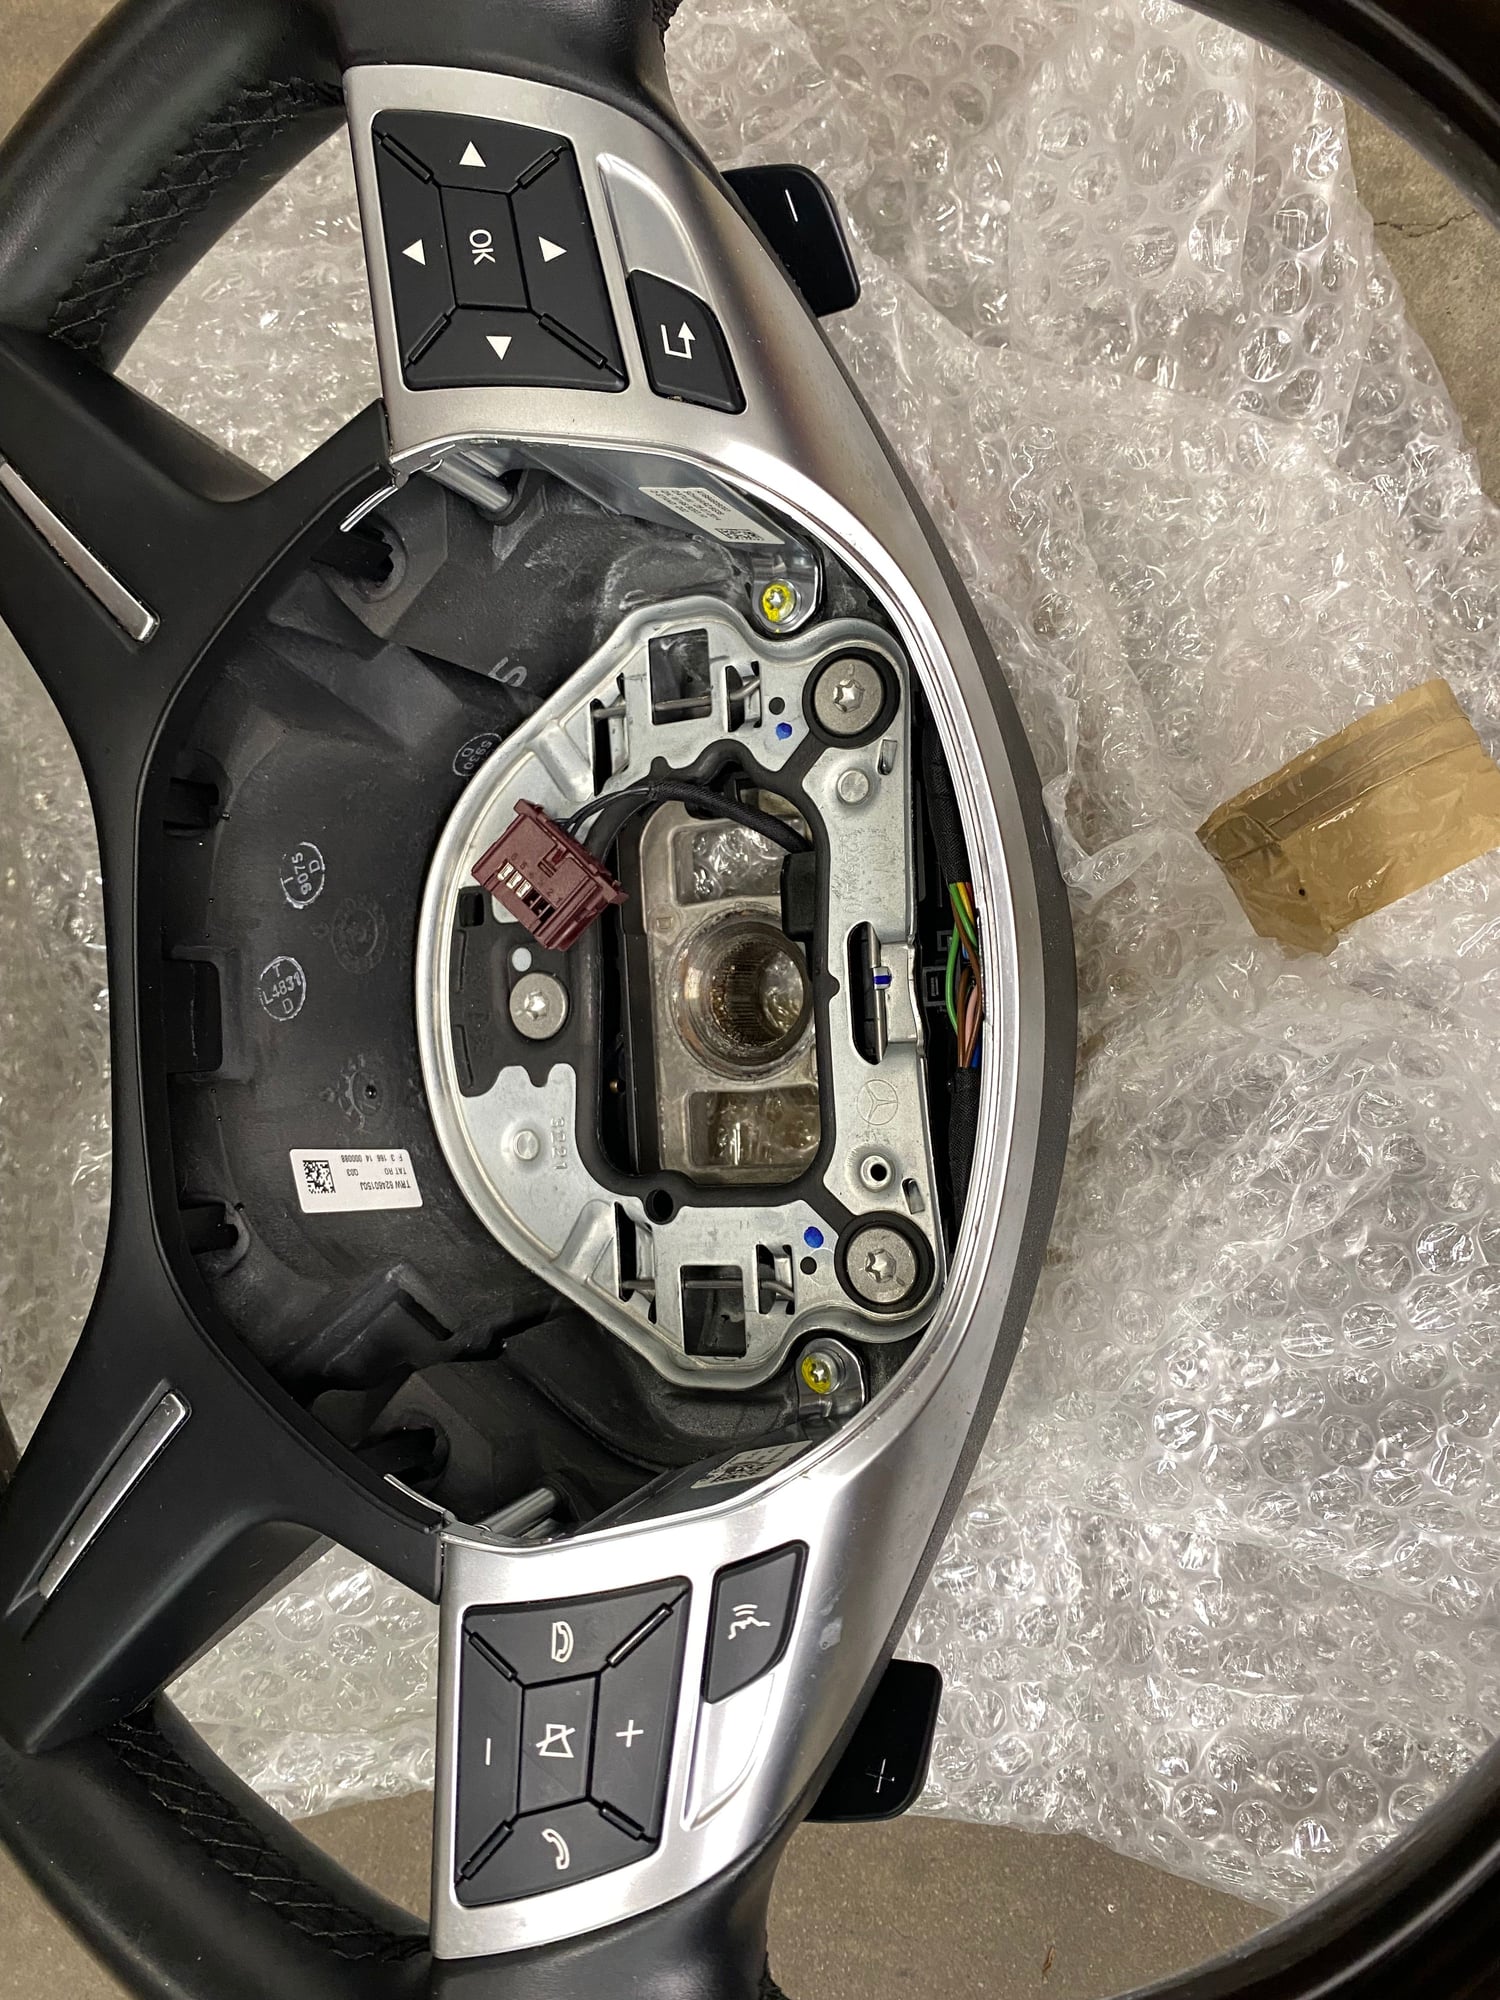 Interior/Upholstery - 166 steering wheel black leather and wood 12-16' - Used - 2012 to 2016 Mercedes-Benz GL550 - Lake Wylie, SC 29710, United States